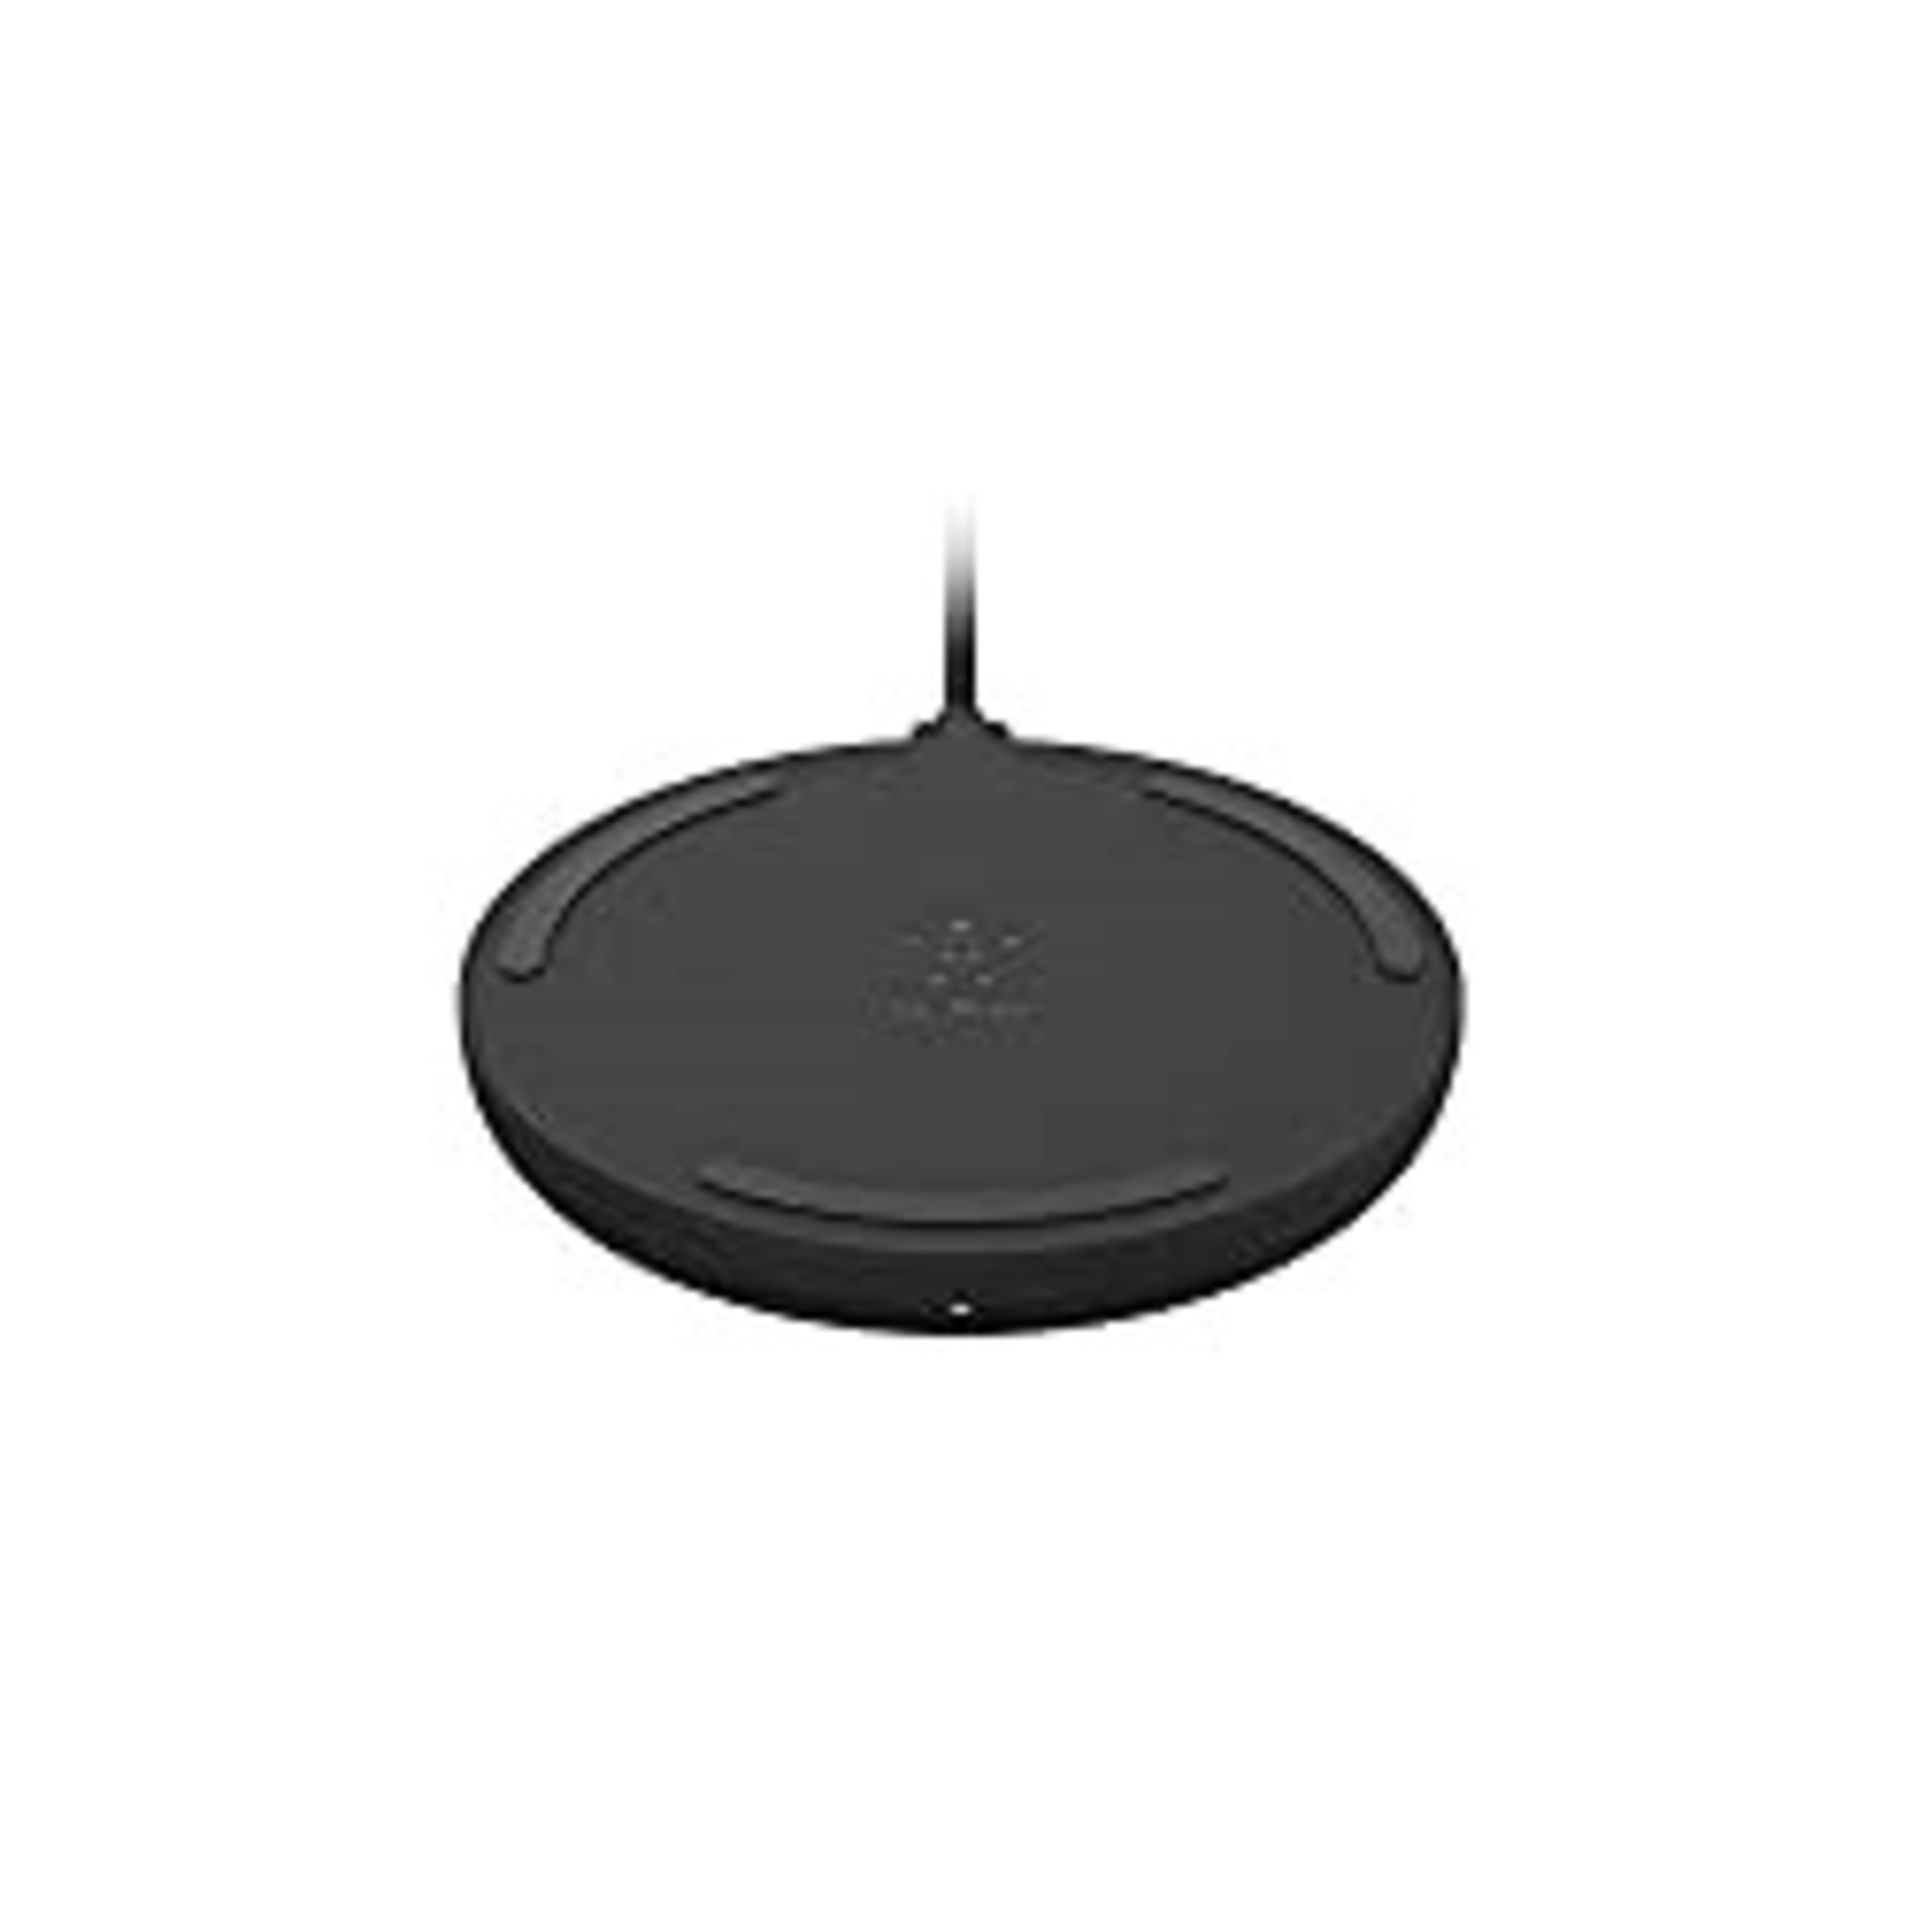 Belkin BoostCharge Wireless Charging Pad 10W (Qi-Certified Fast Wireless Charger for iPhone, Sa